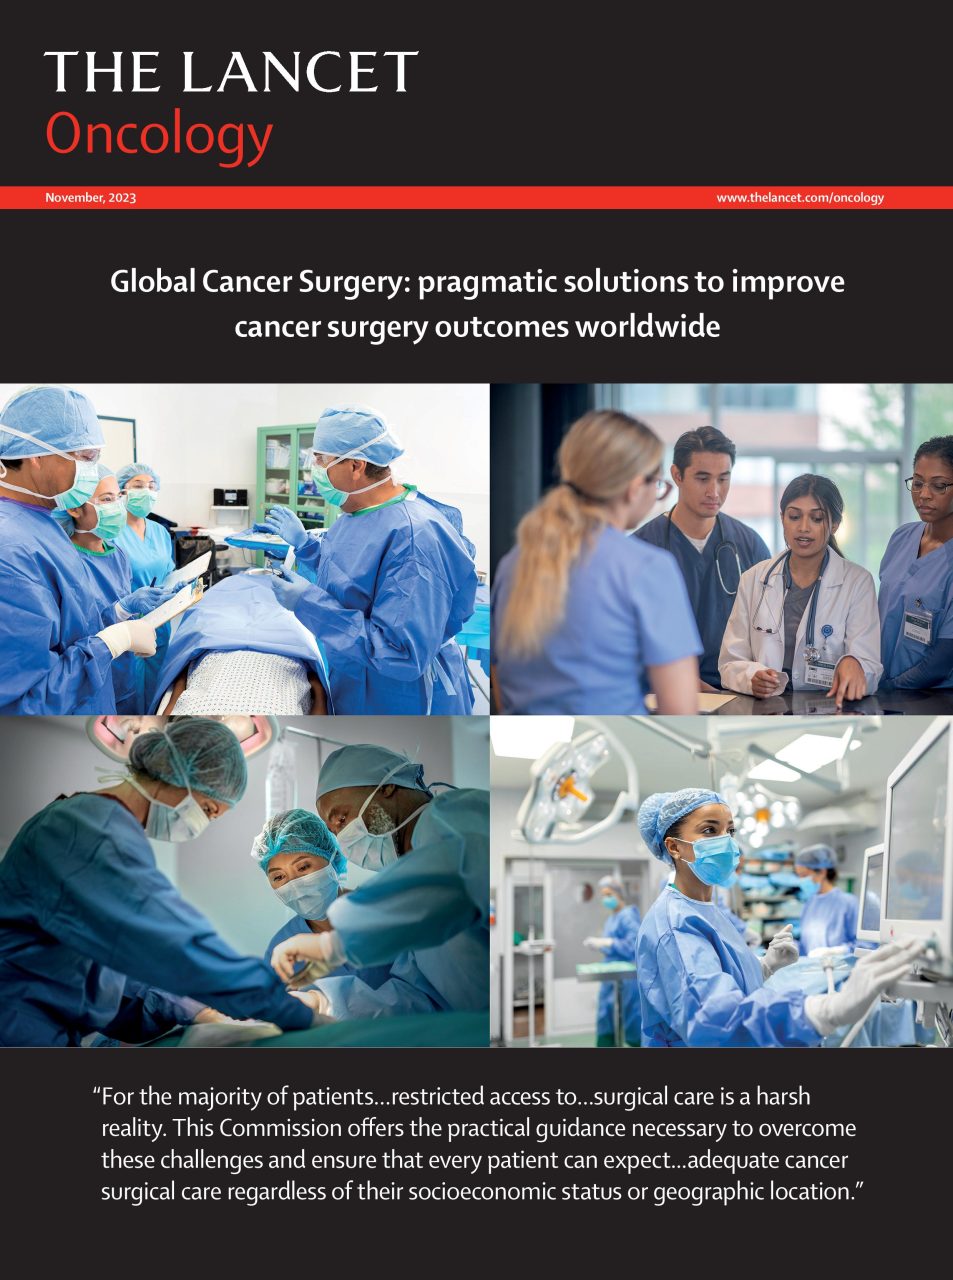 Isabel Rubio: Everything that is needed to provide globally with high quality cancer surgery to every patient